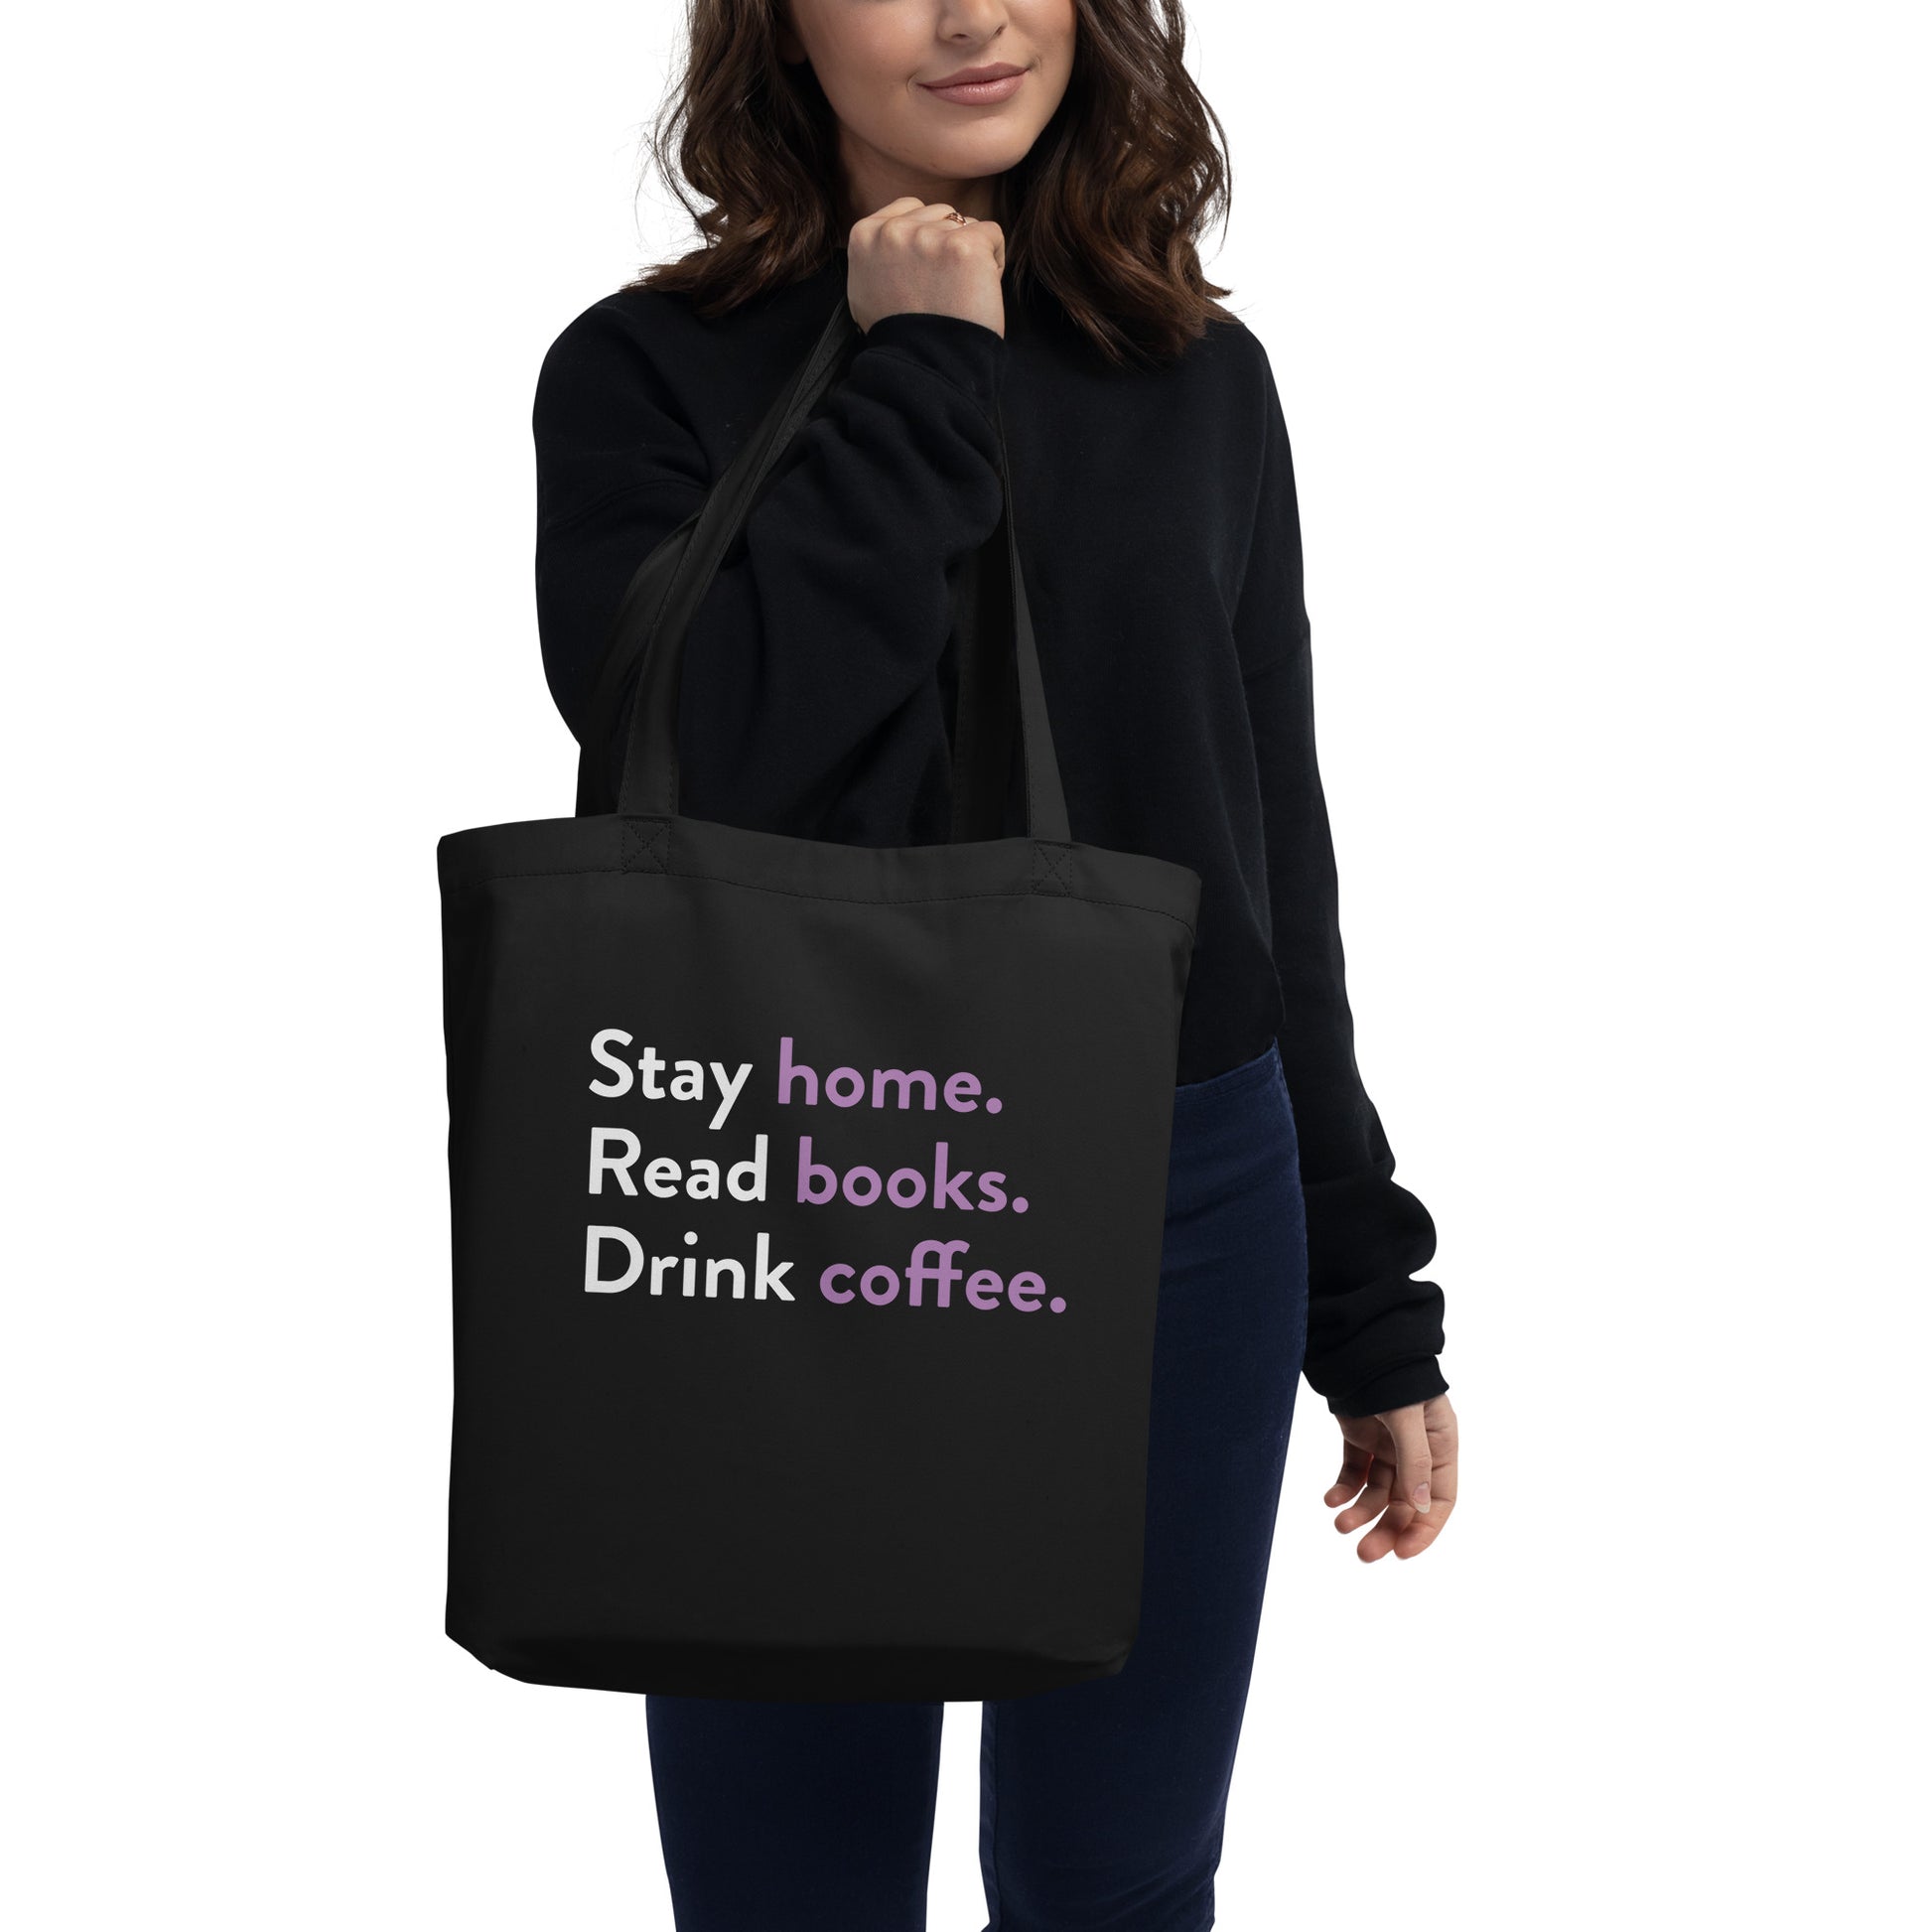 Woman holding black tote bag that says Stay home, read books, drink coffee